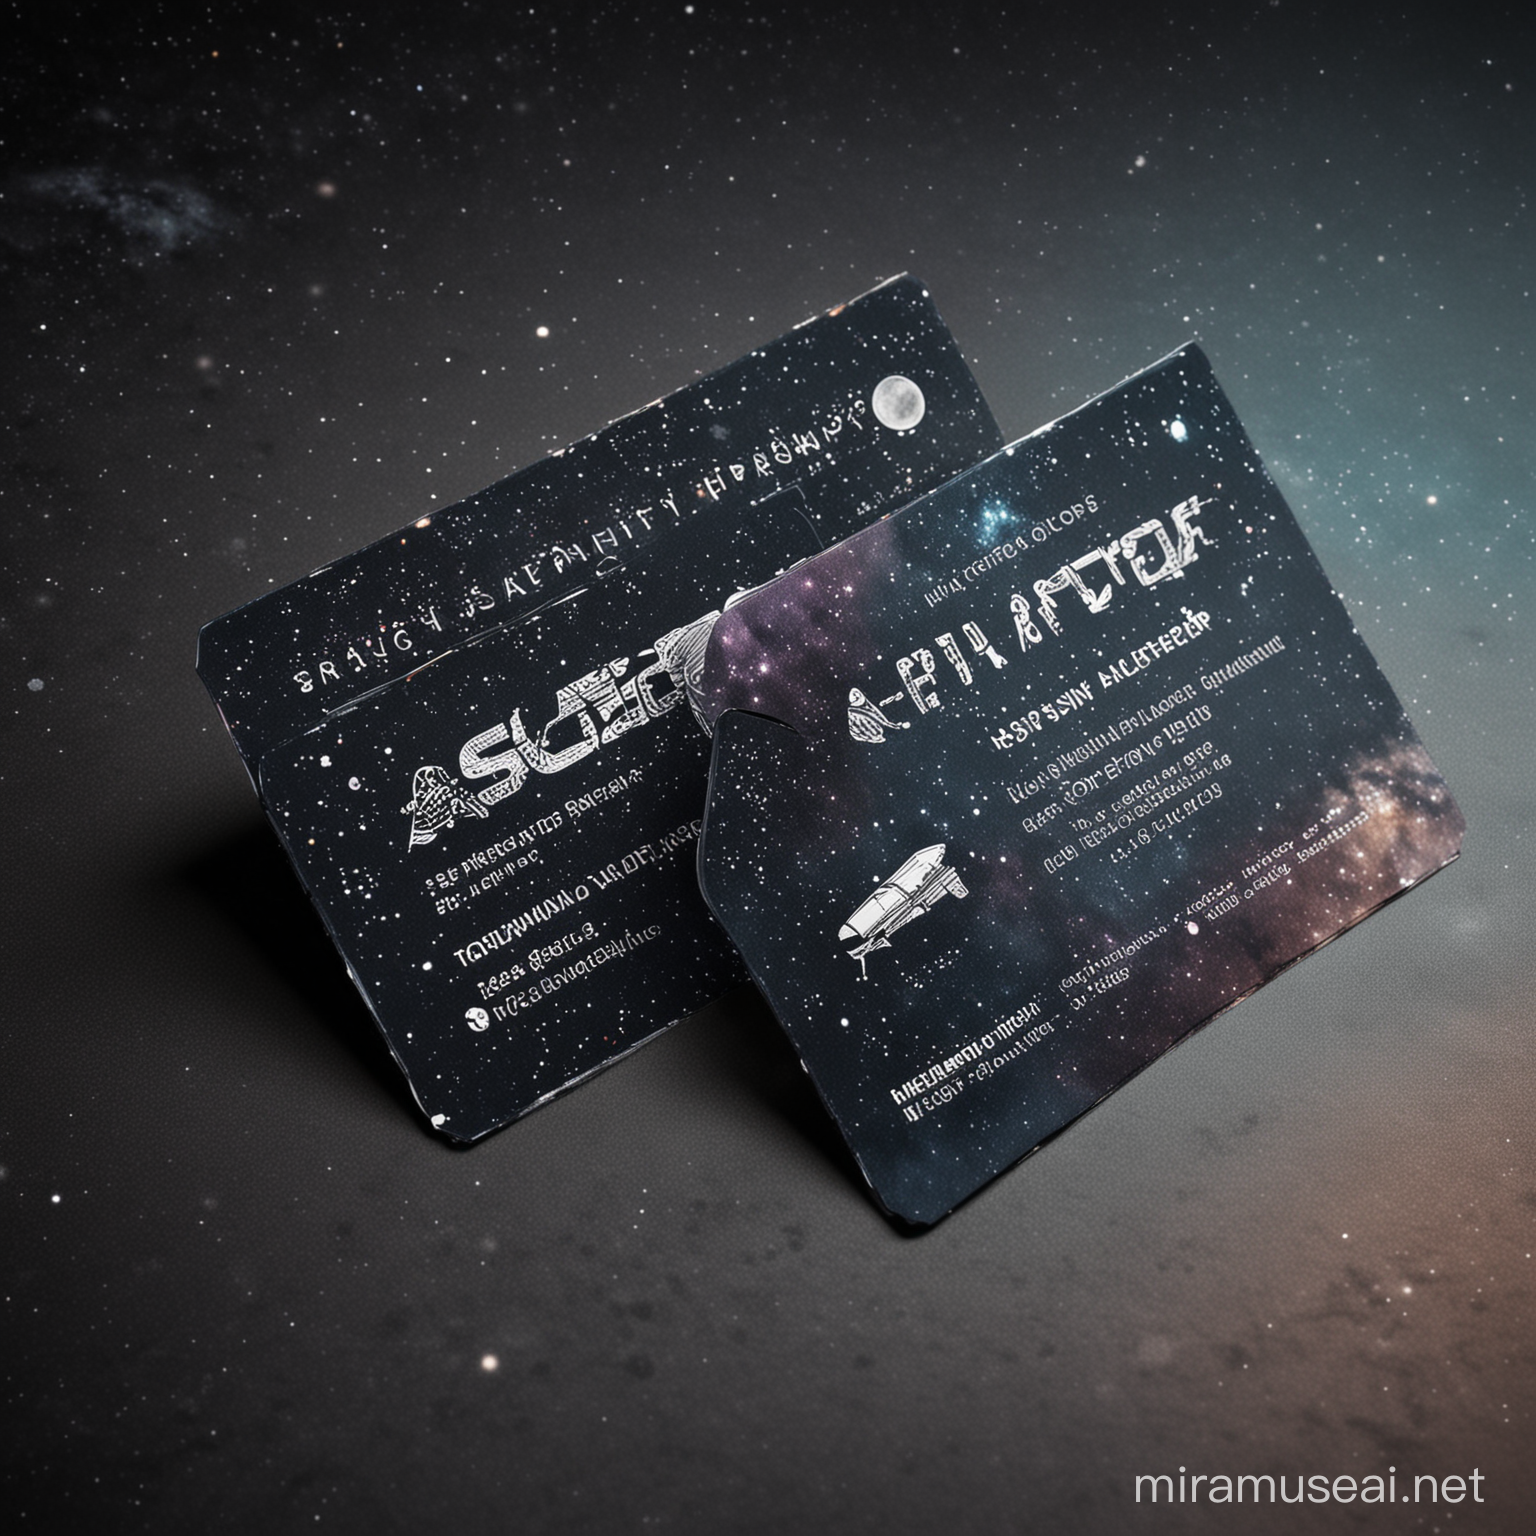 Craft a business card with a Space theme, capturing the wonder, exploration, and vastness of the cosmos. Utilize cosmic backgrounds, nebula patterns, or starry skies to set the scene. Integrate futuristic elements like spaceships, planets, or astronauts to evoke the spirit of space exploration. Employ futuristic fonts and metallic accents to convey a sense of technological advancement. Include business details in a format that reflects the limitless possibilities of space travel. front side and back side should generated